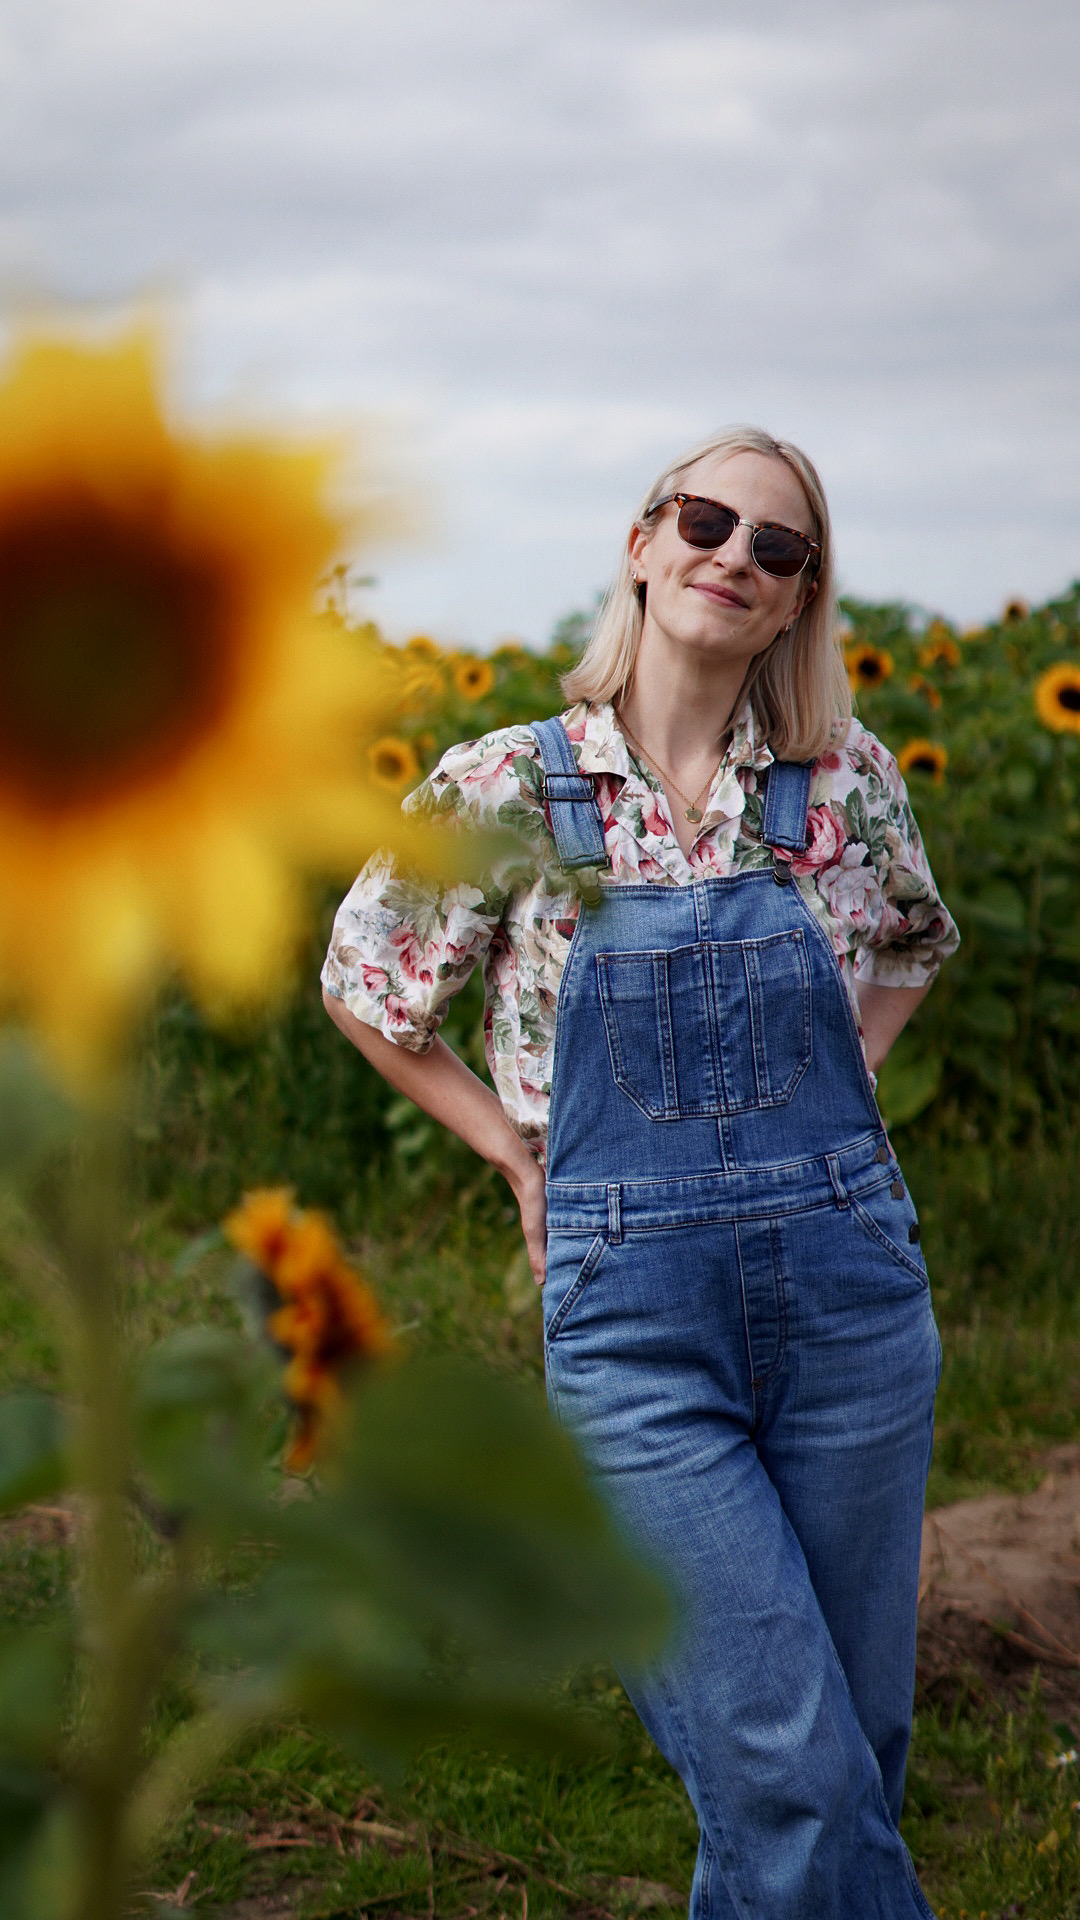 Amy is standing in a field of sunflowers, she is wearing a floral shirt and denim dungarees and looking to camera smiling